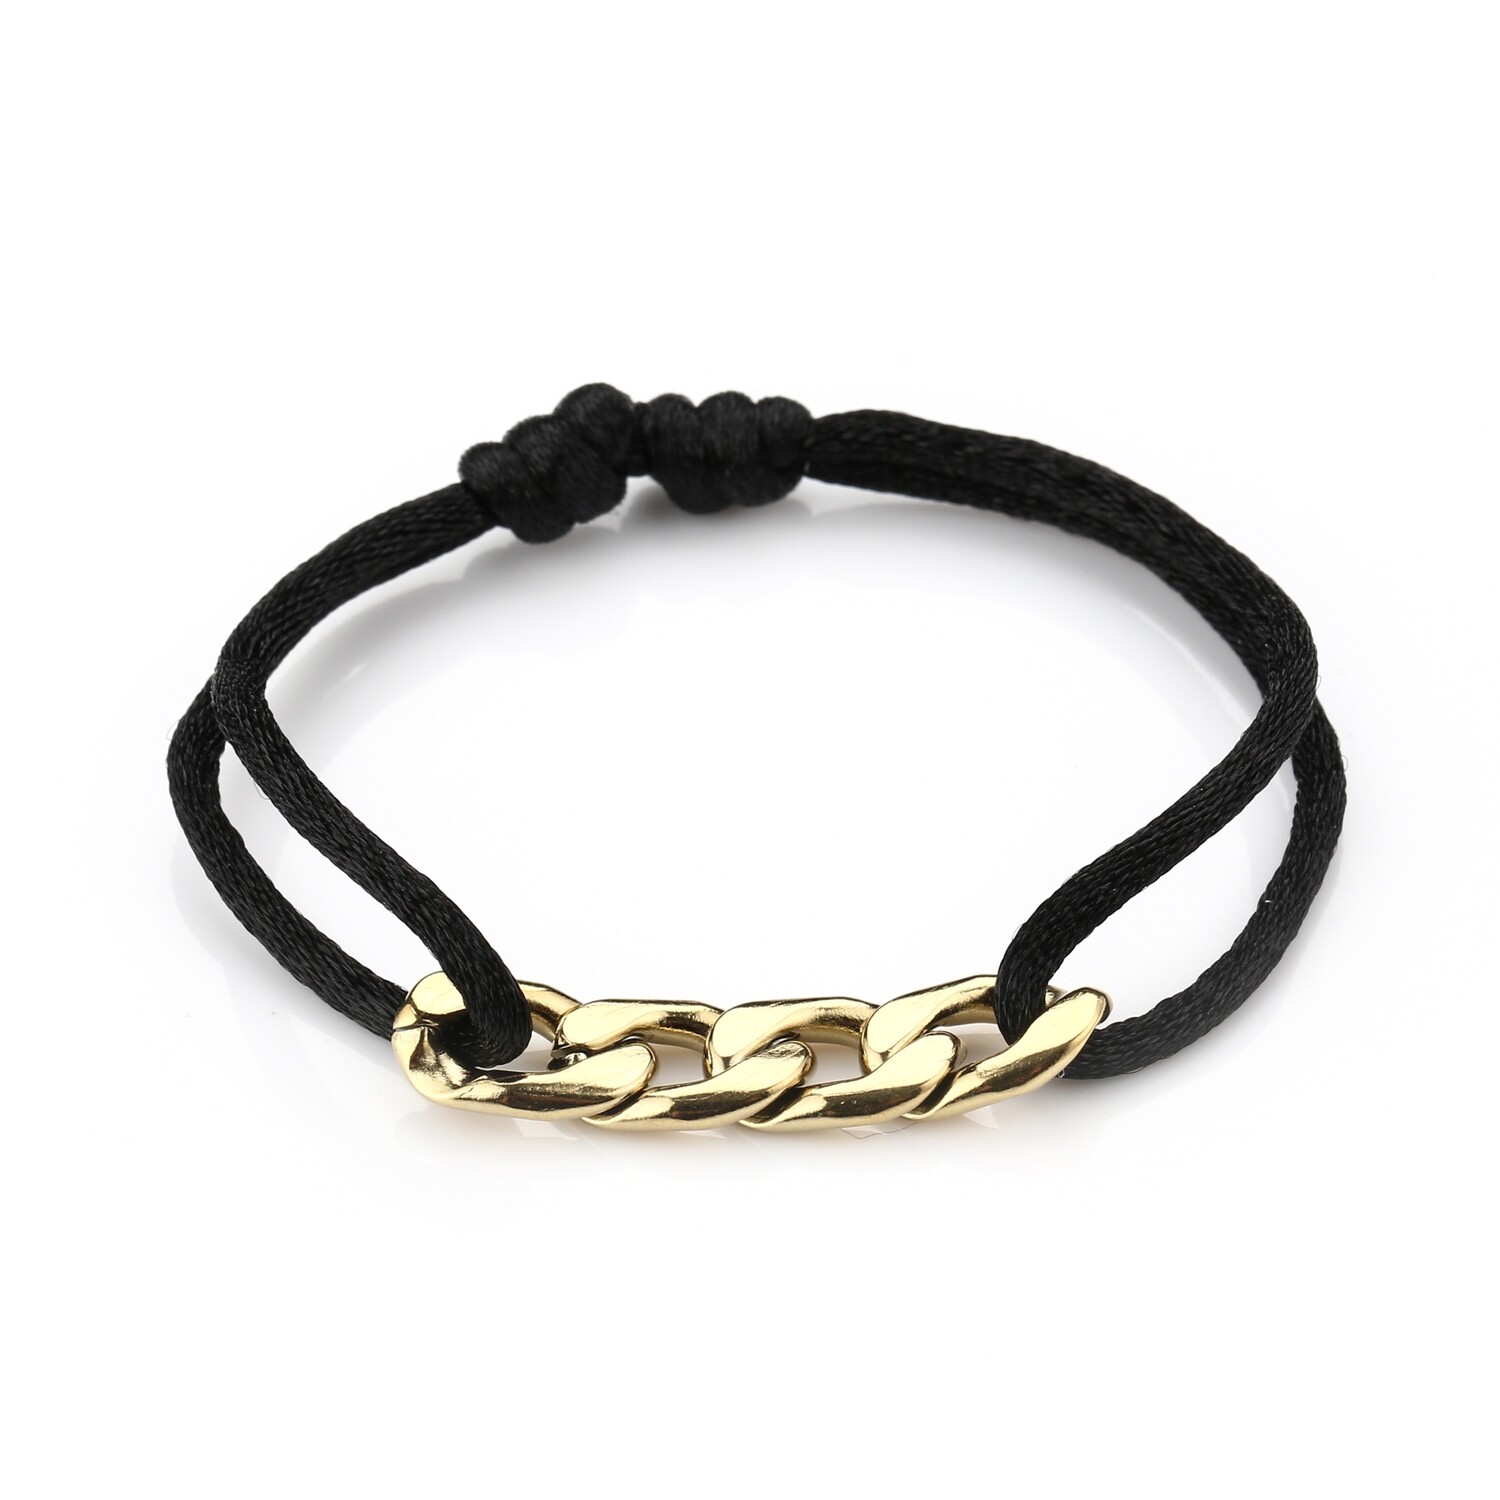 Black and Gold armband